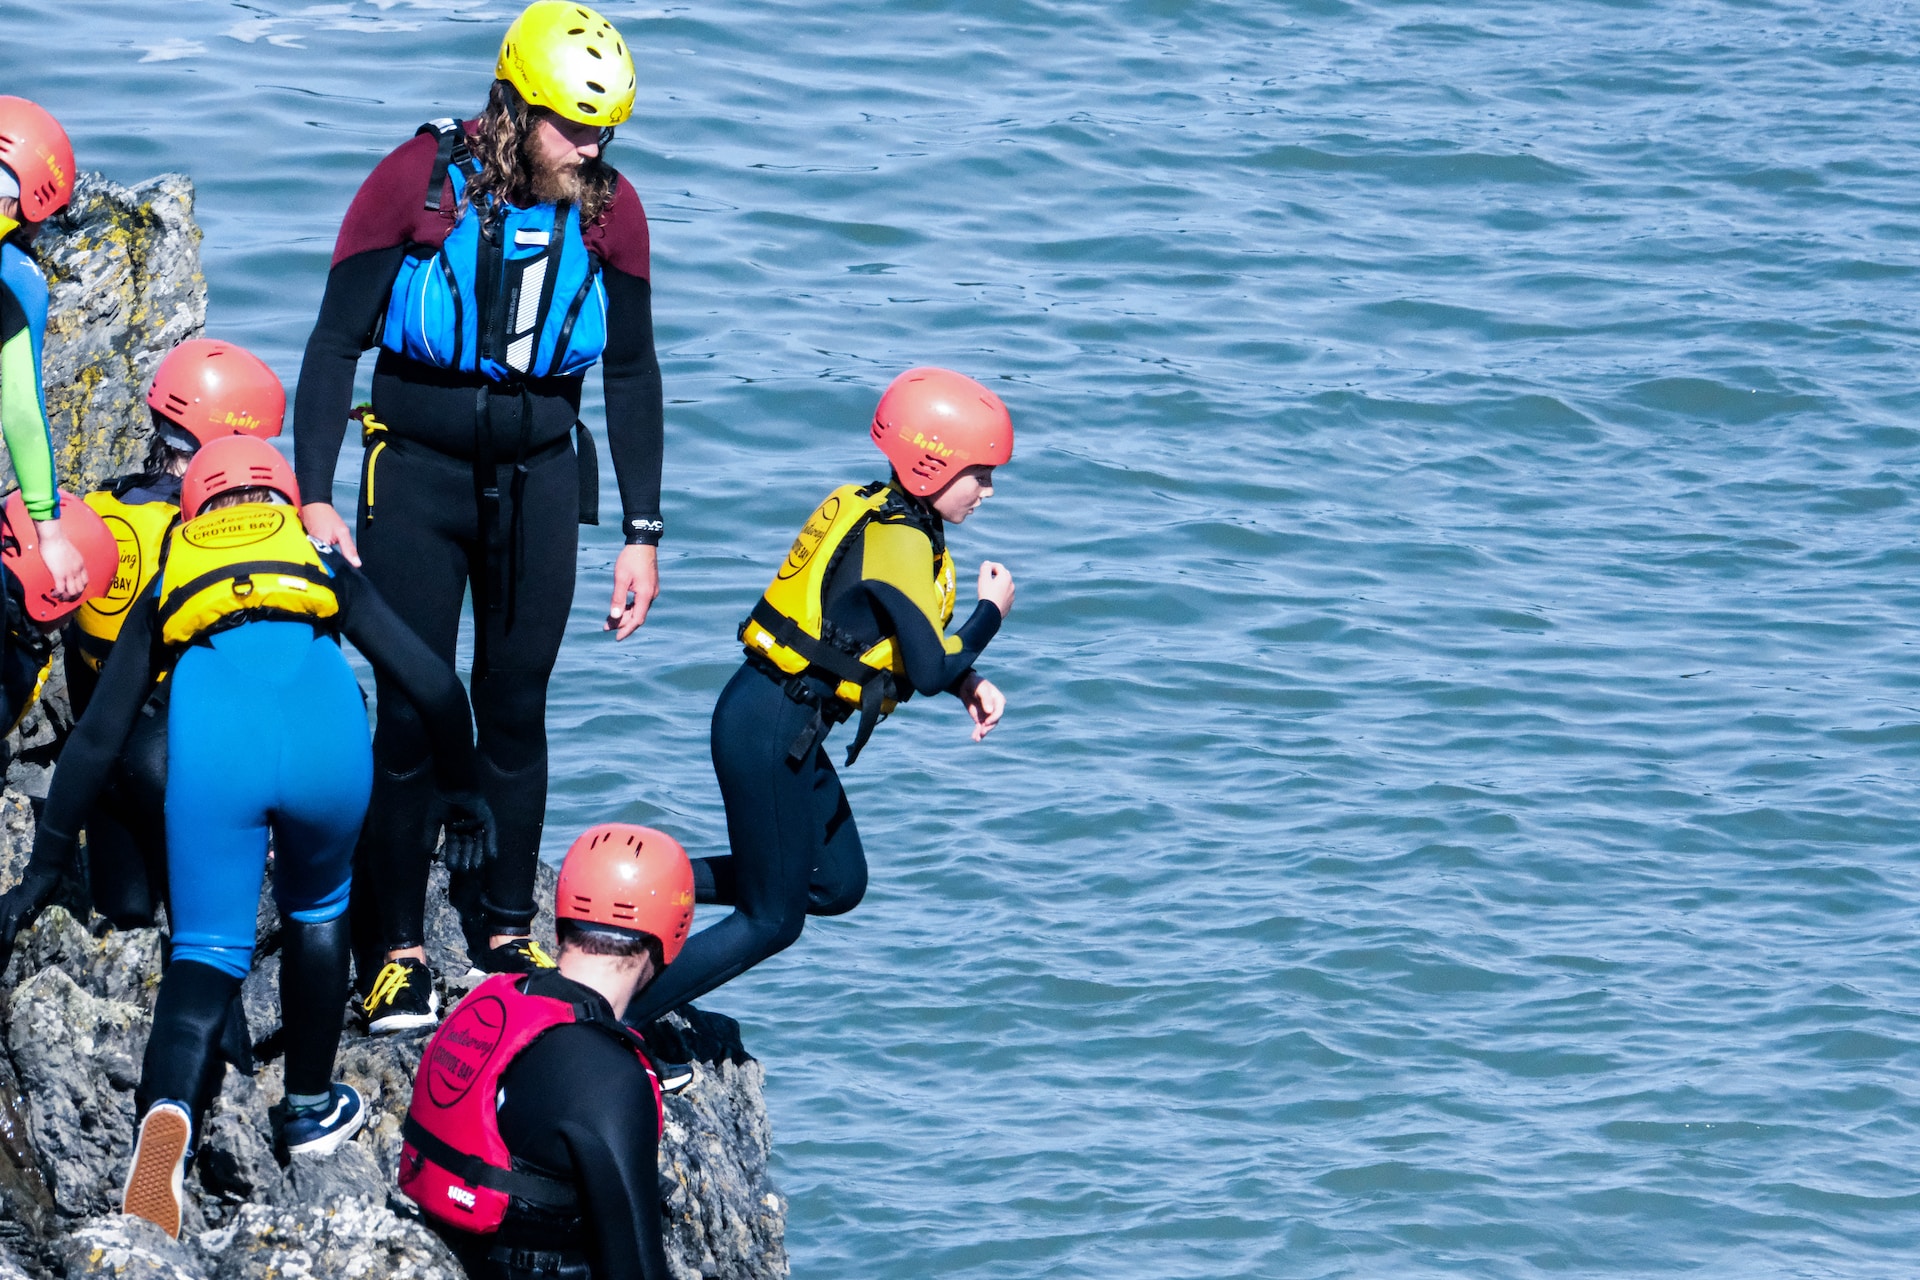 A coasteering group with the full gear.